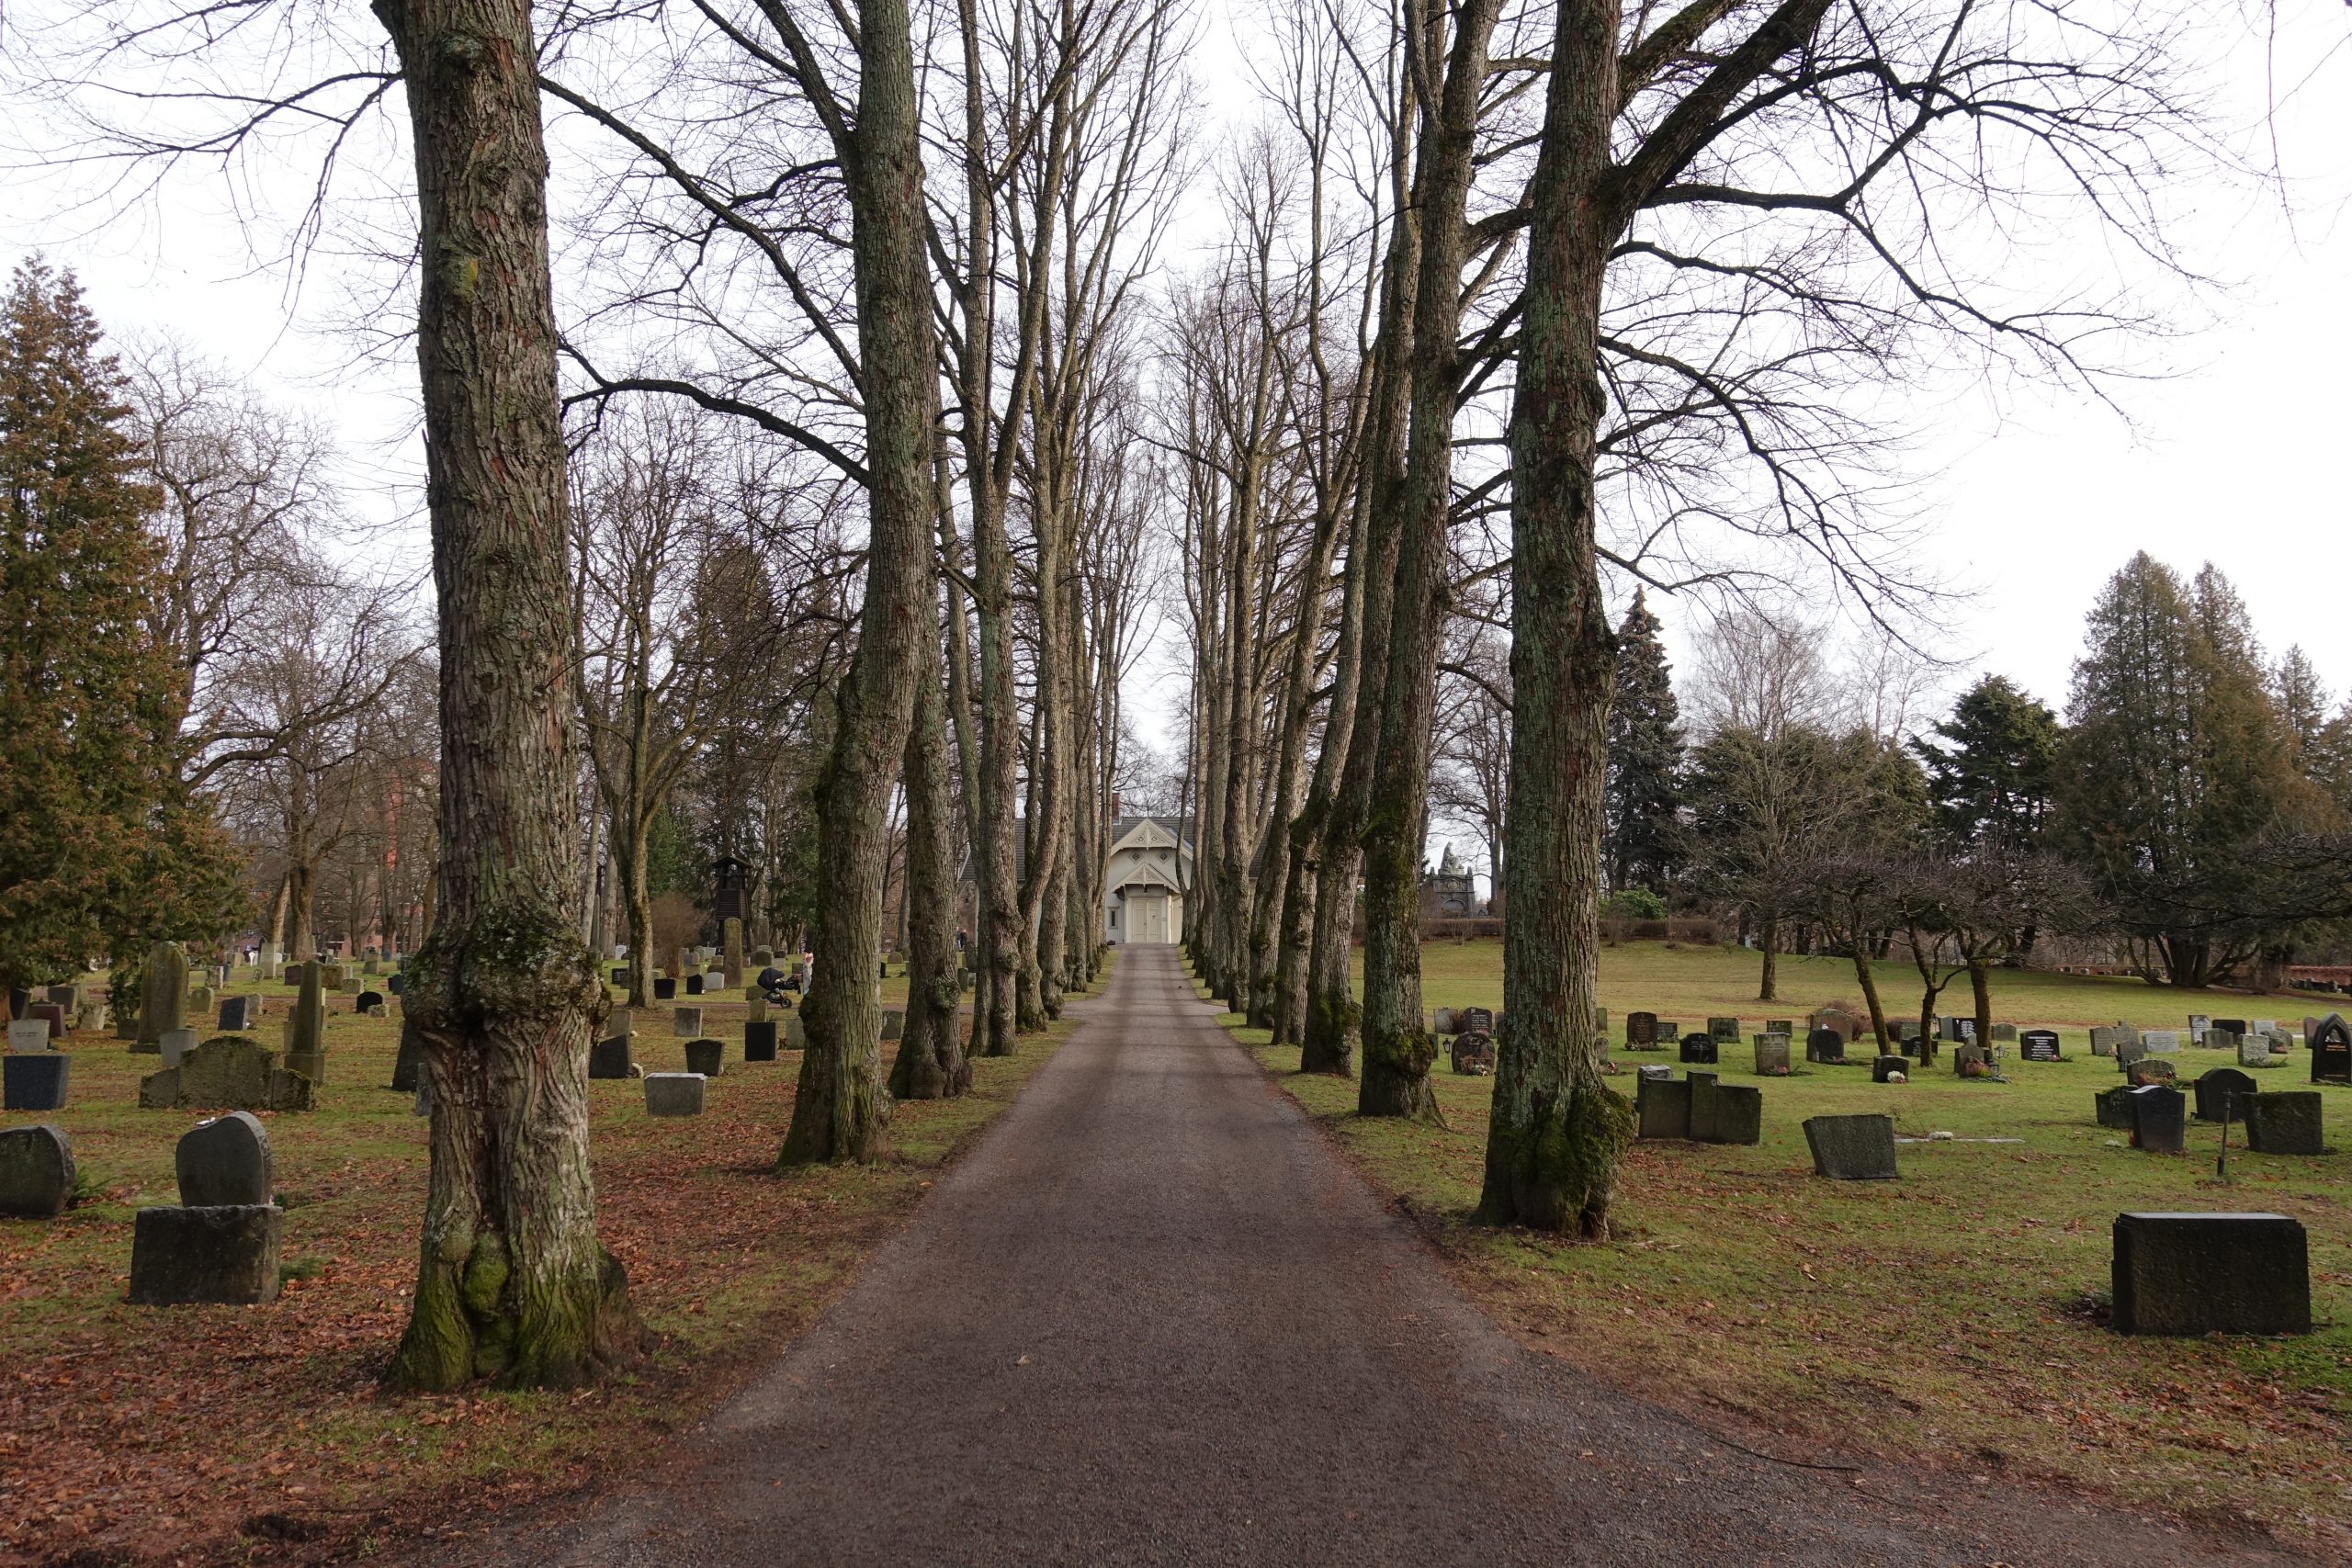 A picture of a pathway through a graveyard, lined either side with a row of trees and gravestones. At the end of the pathway is a wooden building.